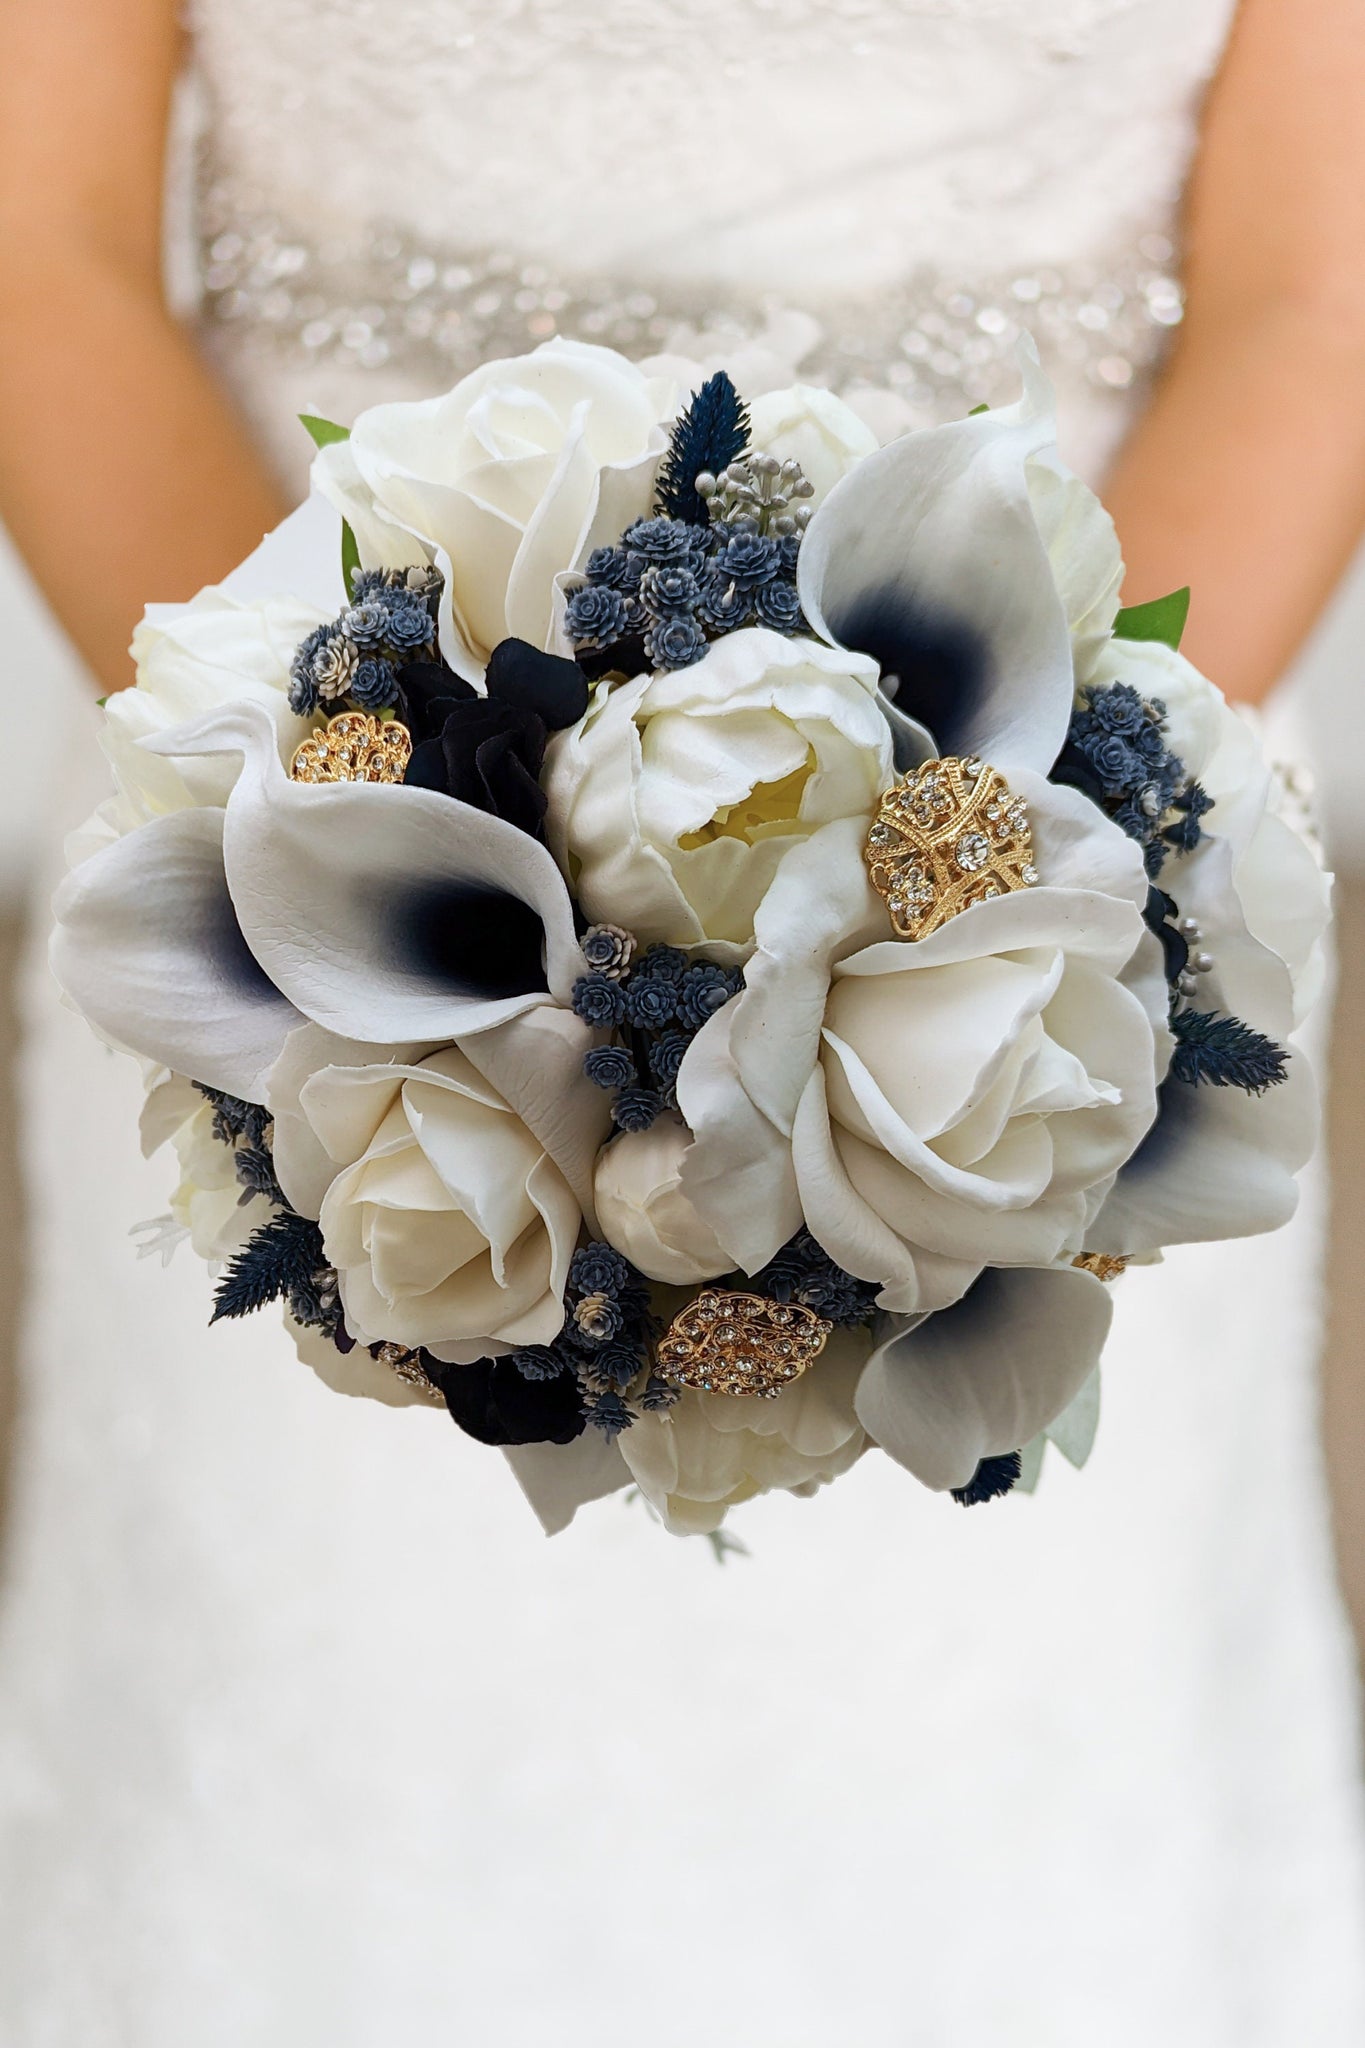 Real Touch Bridal Bouquet - White Roses Peonies Navy Callas  Gold Brooches - Bridal or Bridesmaid Bouquet Add Corsages Boutonnieres & More!